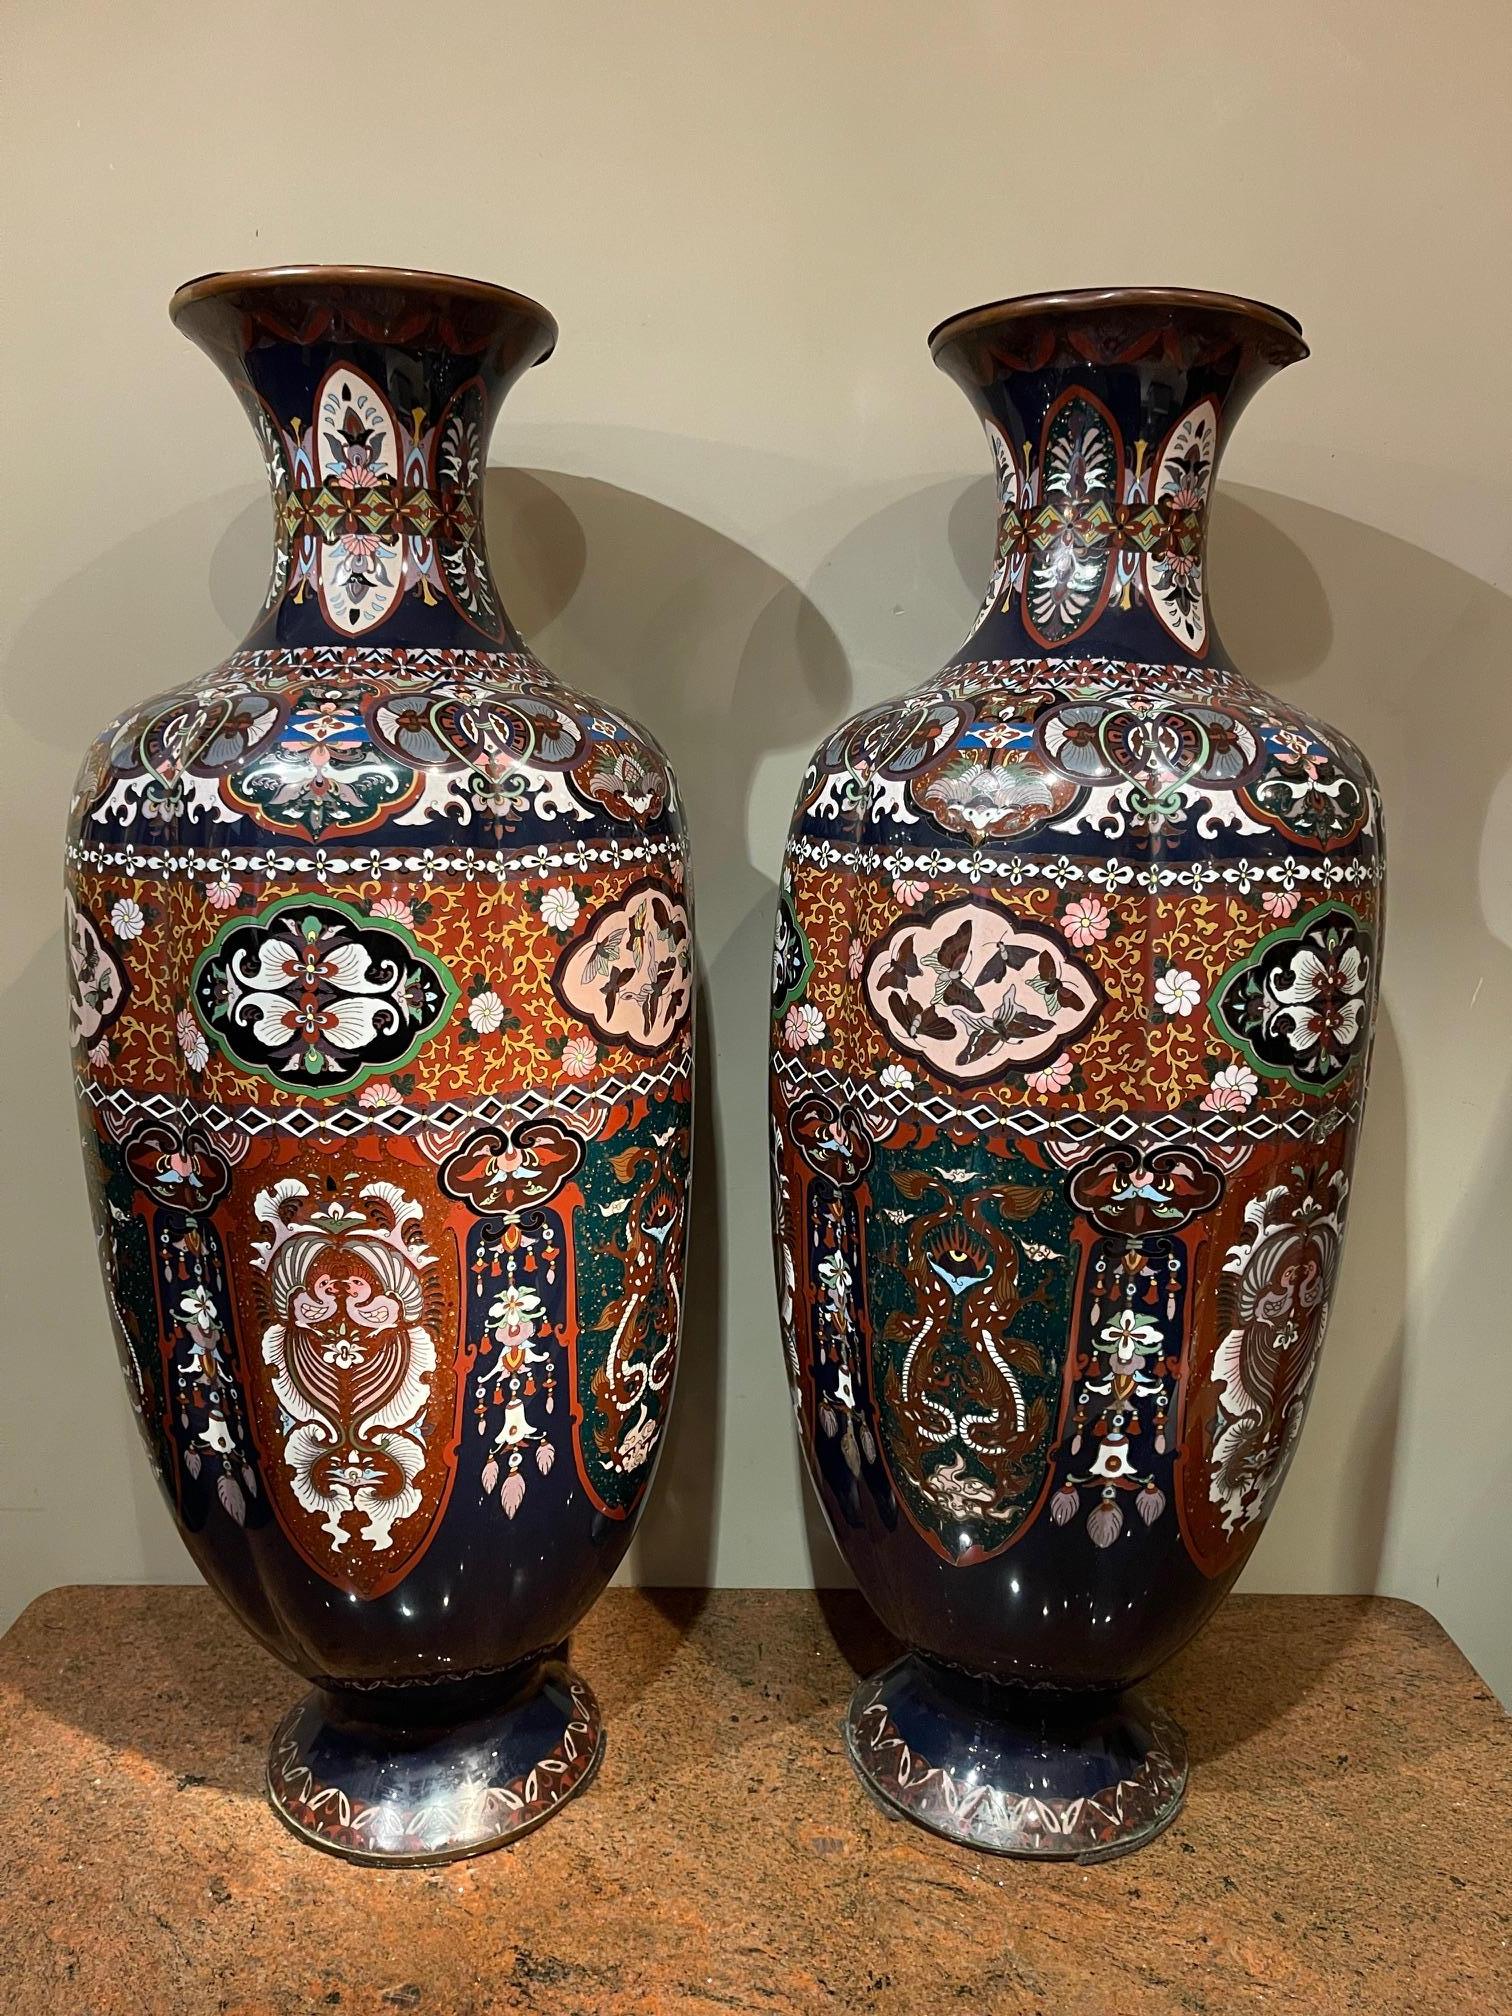 Rare and very large pair ( 0,92m high) of cloisonné vases , Japan, 19th c.
The 